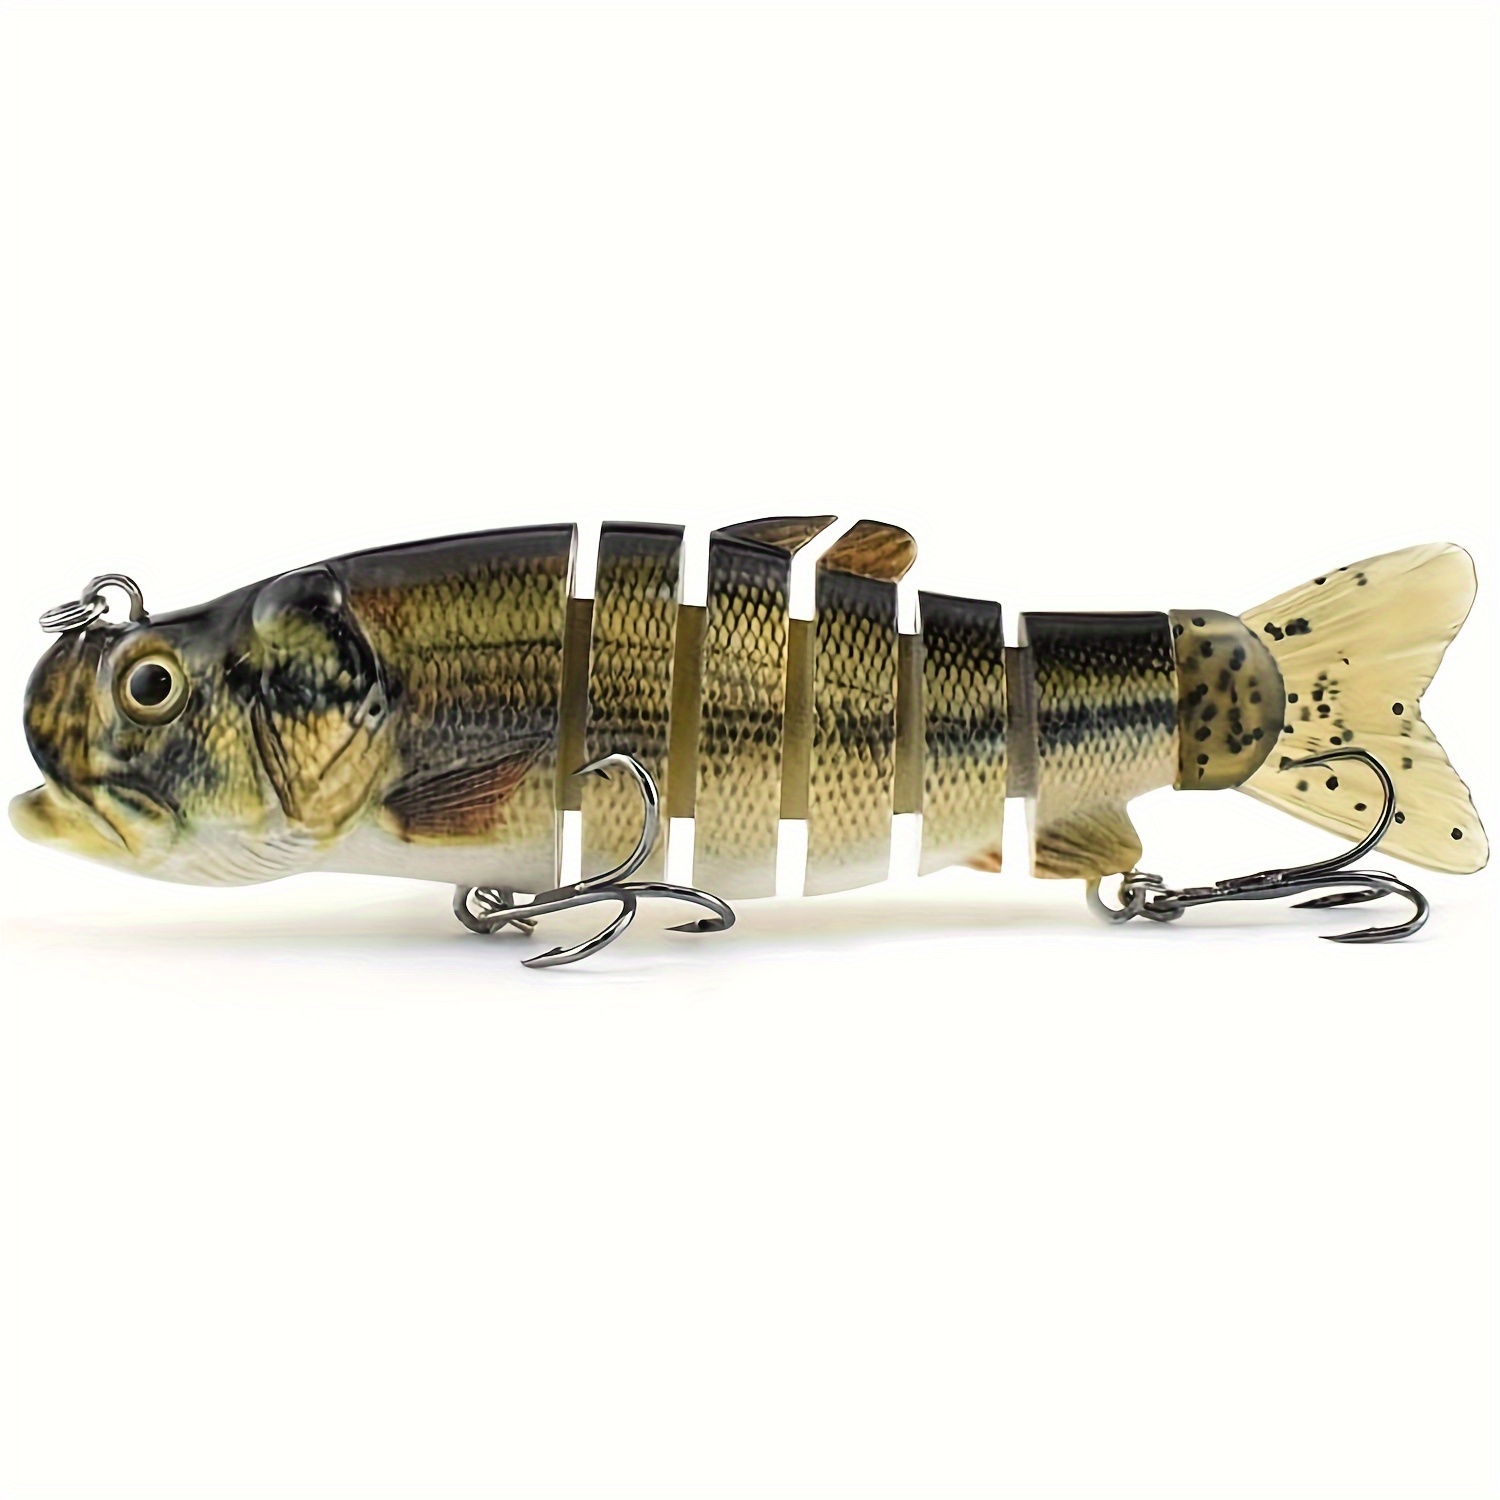 7.87inch/3.97oz Bionic Trout Fishing Bait With Mouth-Opened Design,  Segmented Swimbait With Soft Tail For Freshwater And Saltwater